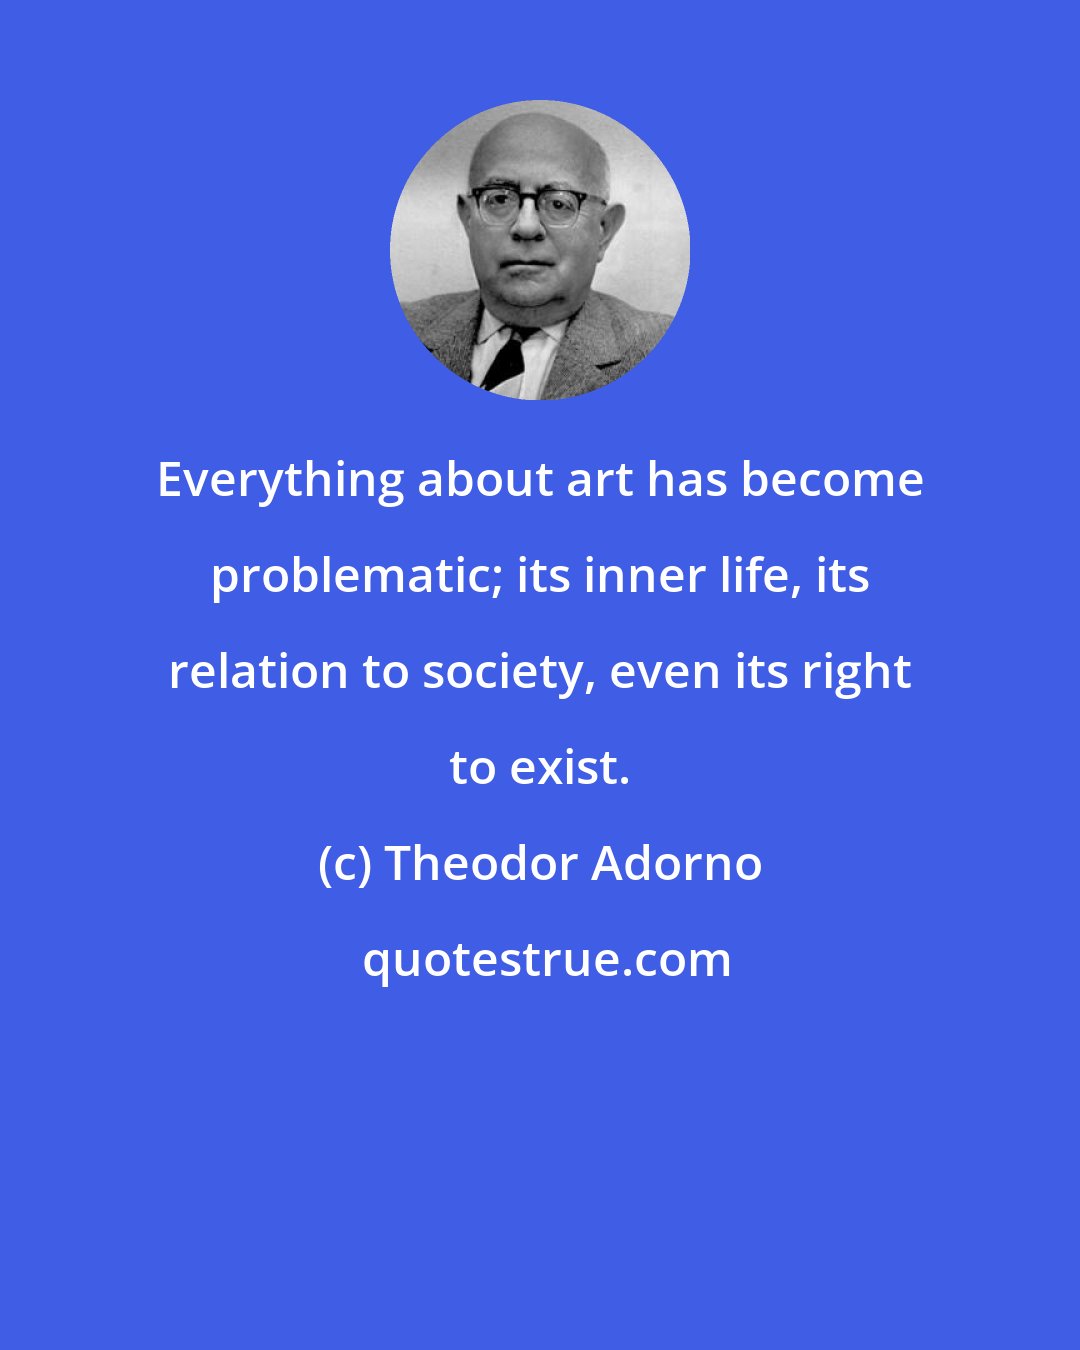 Theodor Adorno: Everything about art has become problematic; its inner life, its relation to society, even its right to exist.